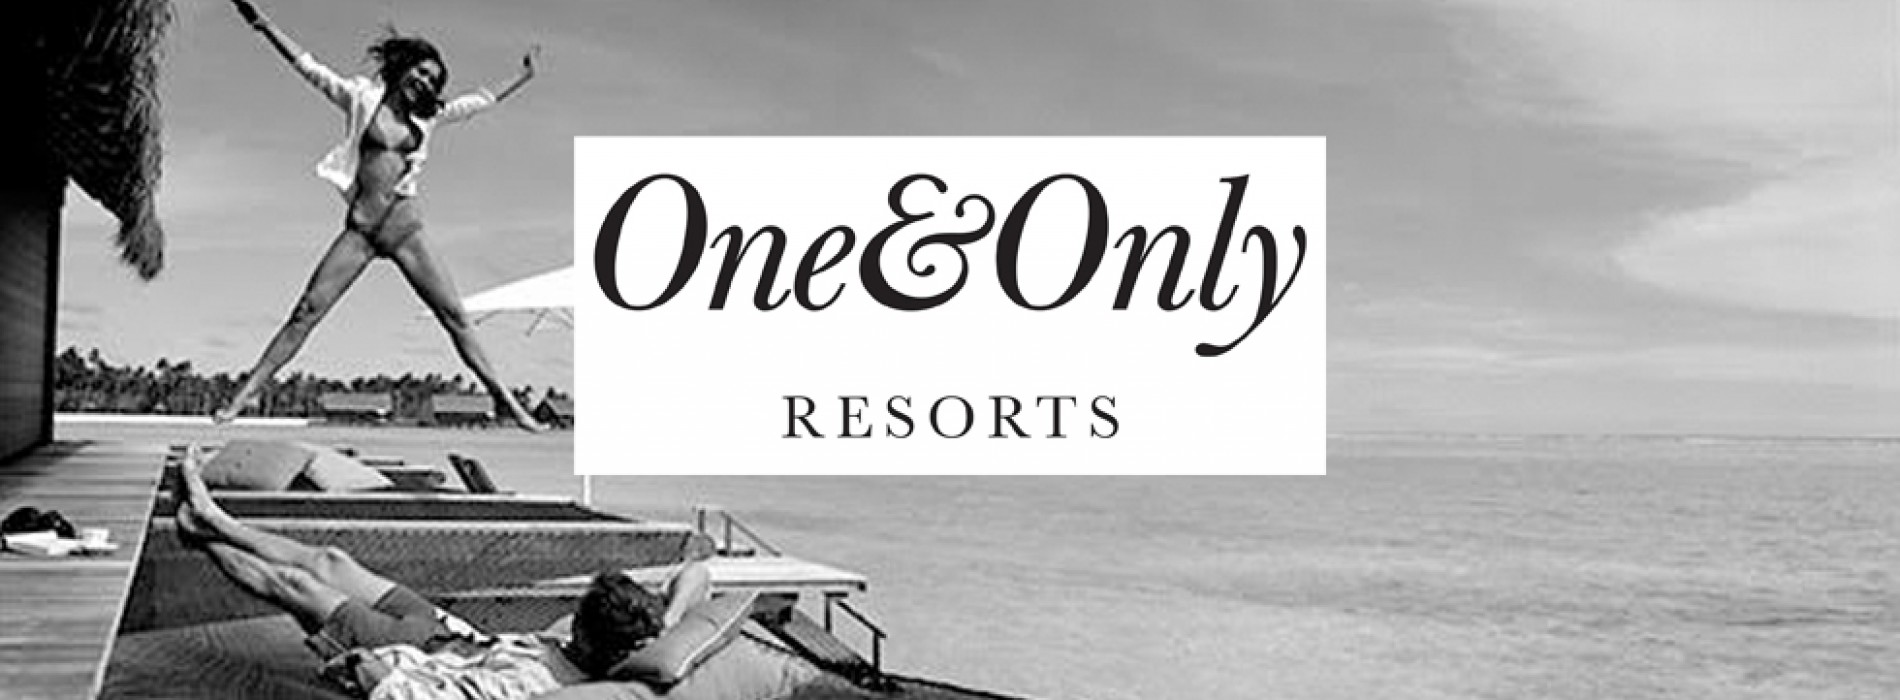 Wrap yourself in romance at One&Only Resorts